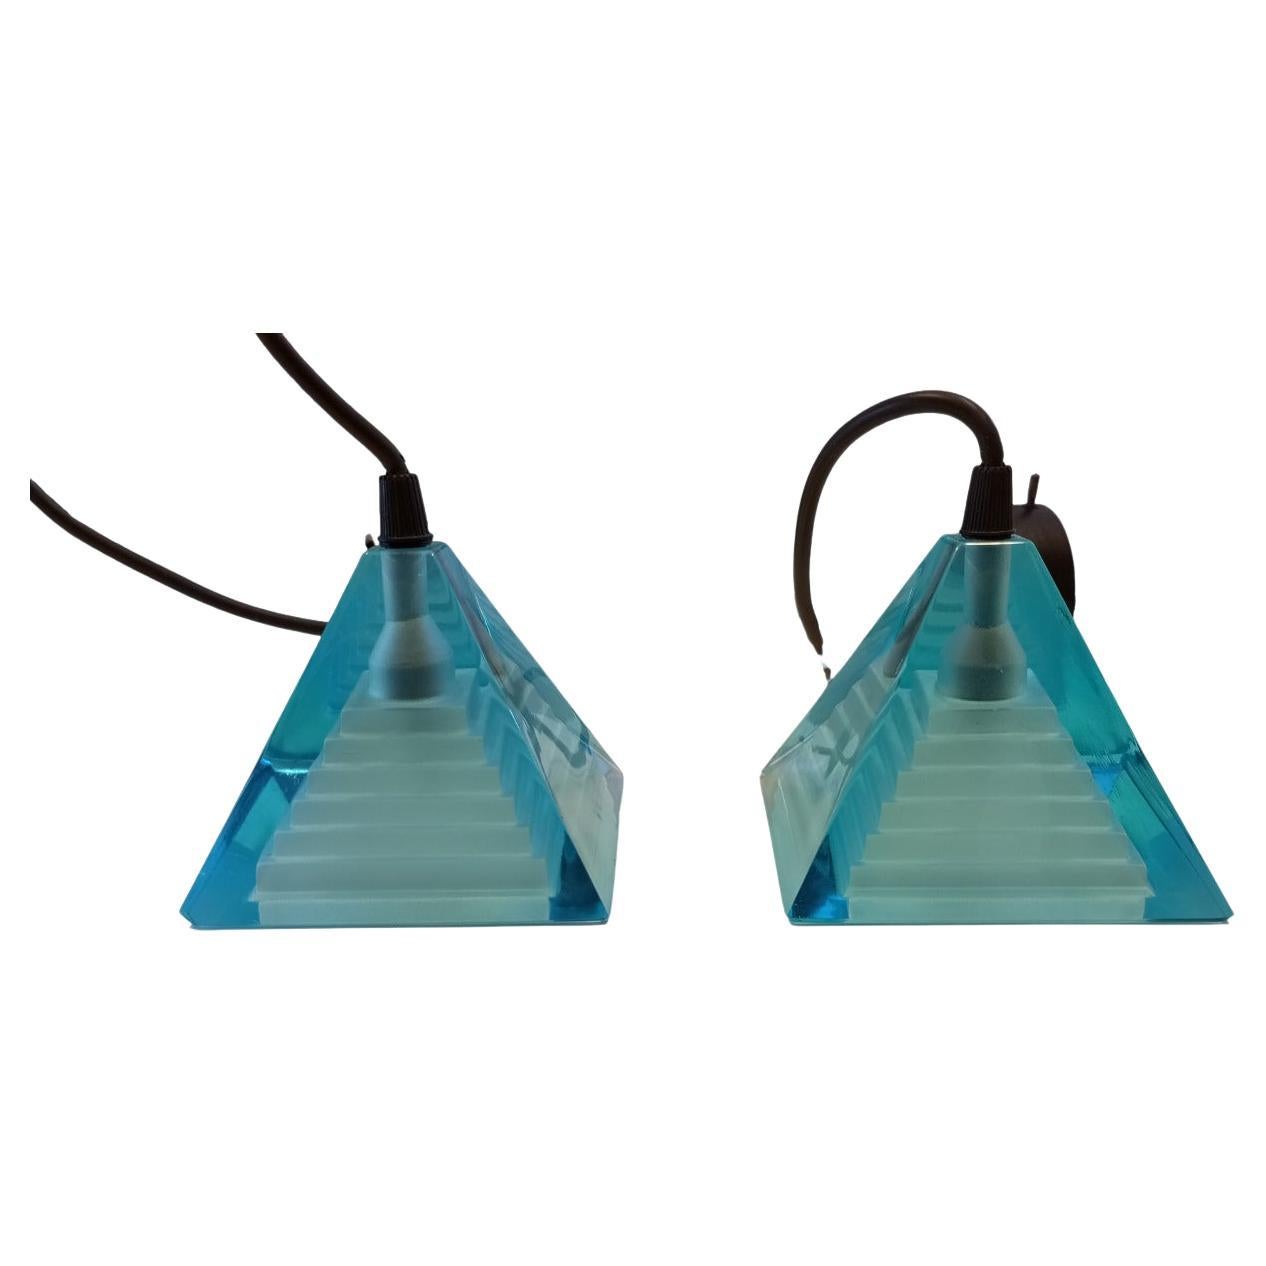 Pair of blue 'Pyramid' lamps designed by Paolo Piva for Mazzega  Murano glass 